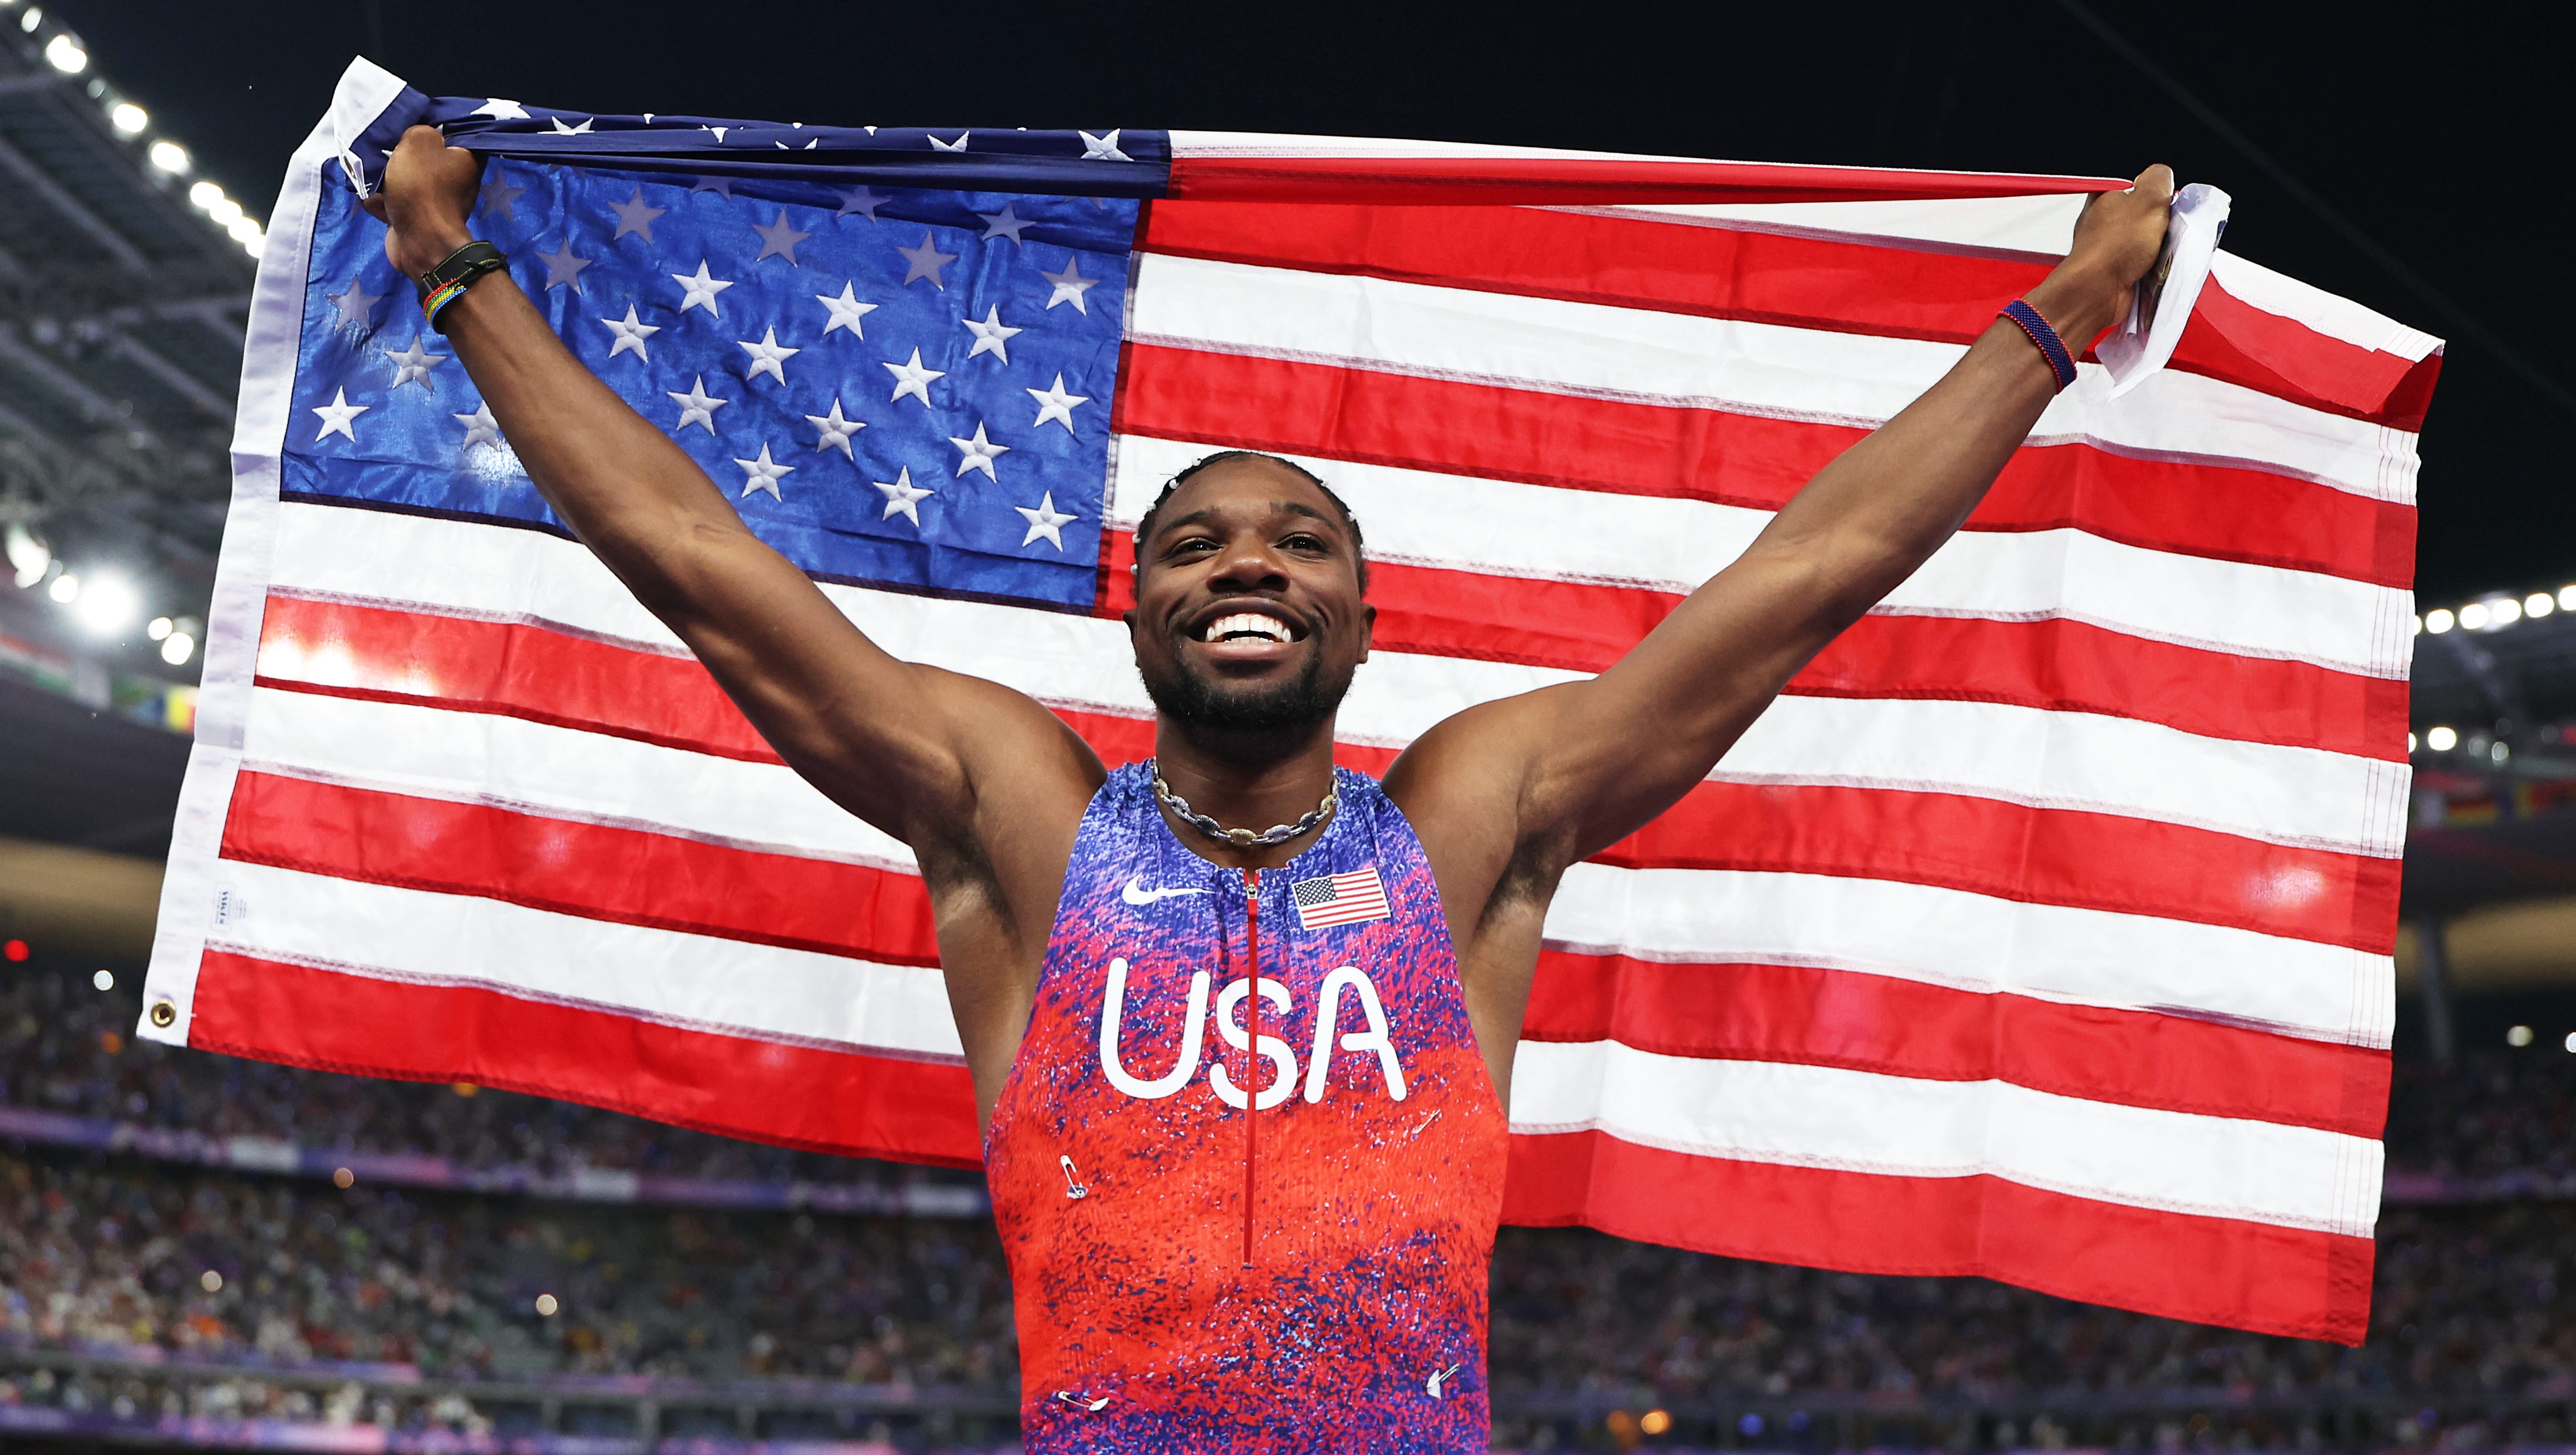 Noah Lyles Wins Historically Close 100-Meter Sprint in Photo Finish – Hollywood Life